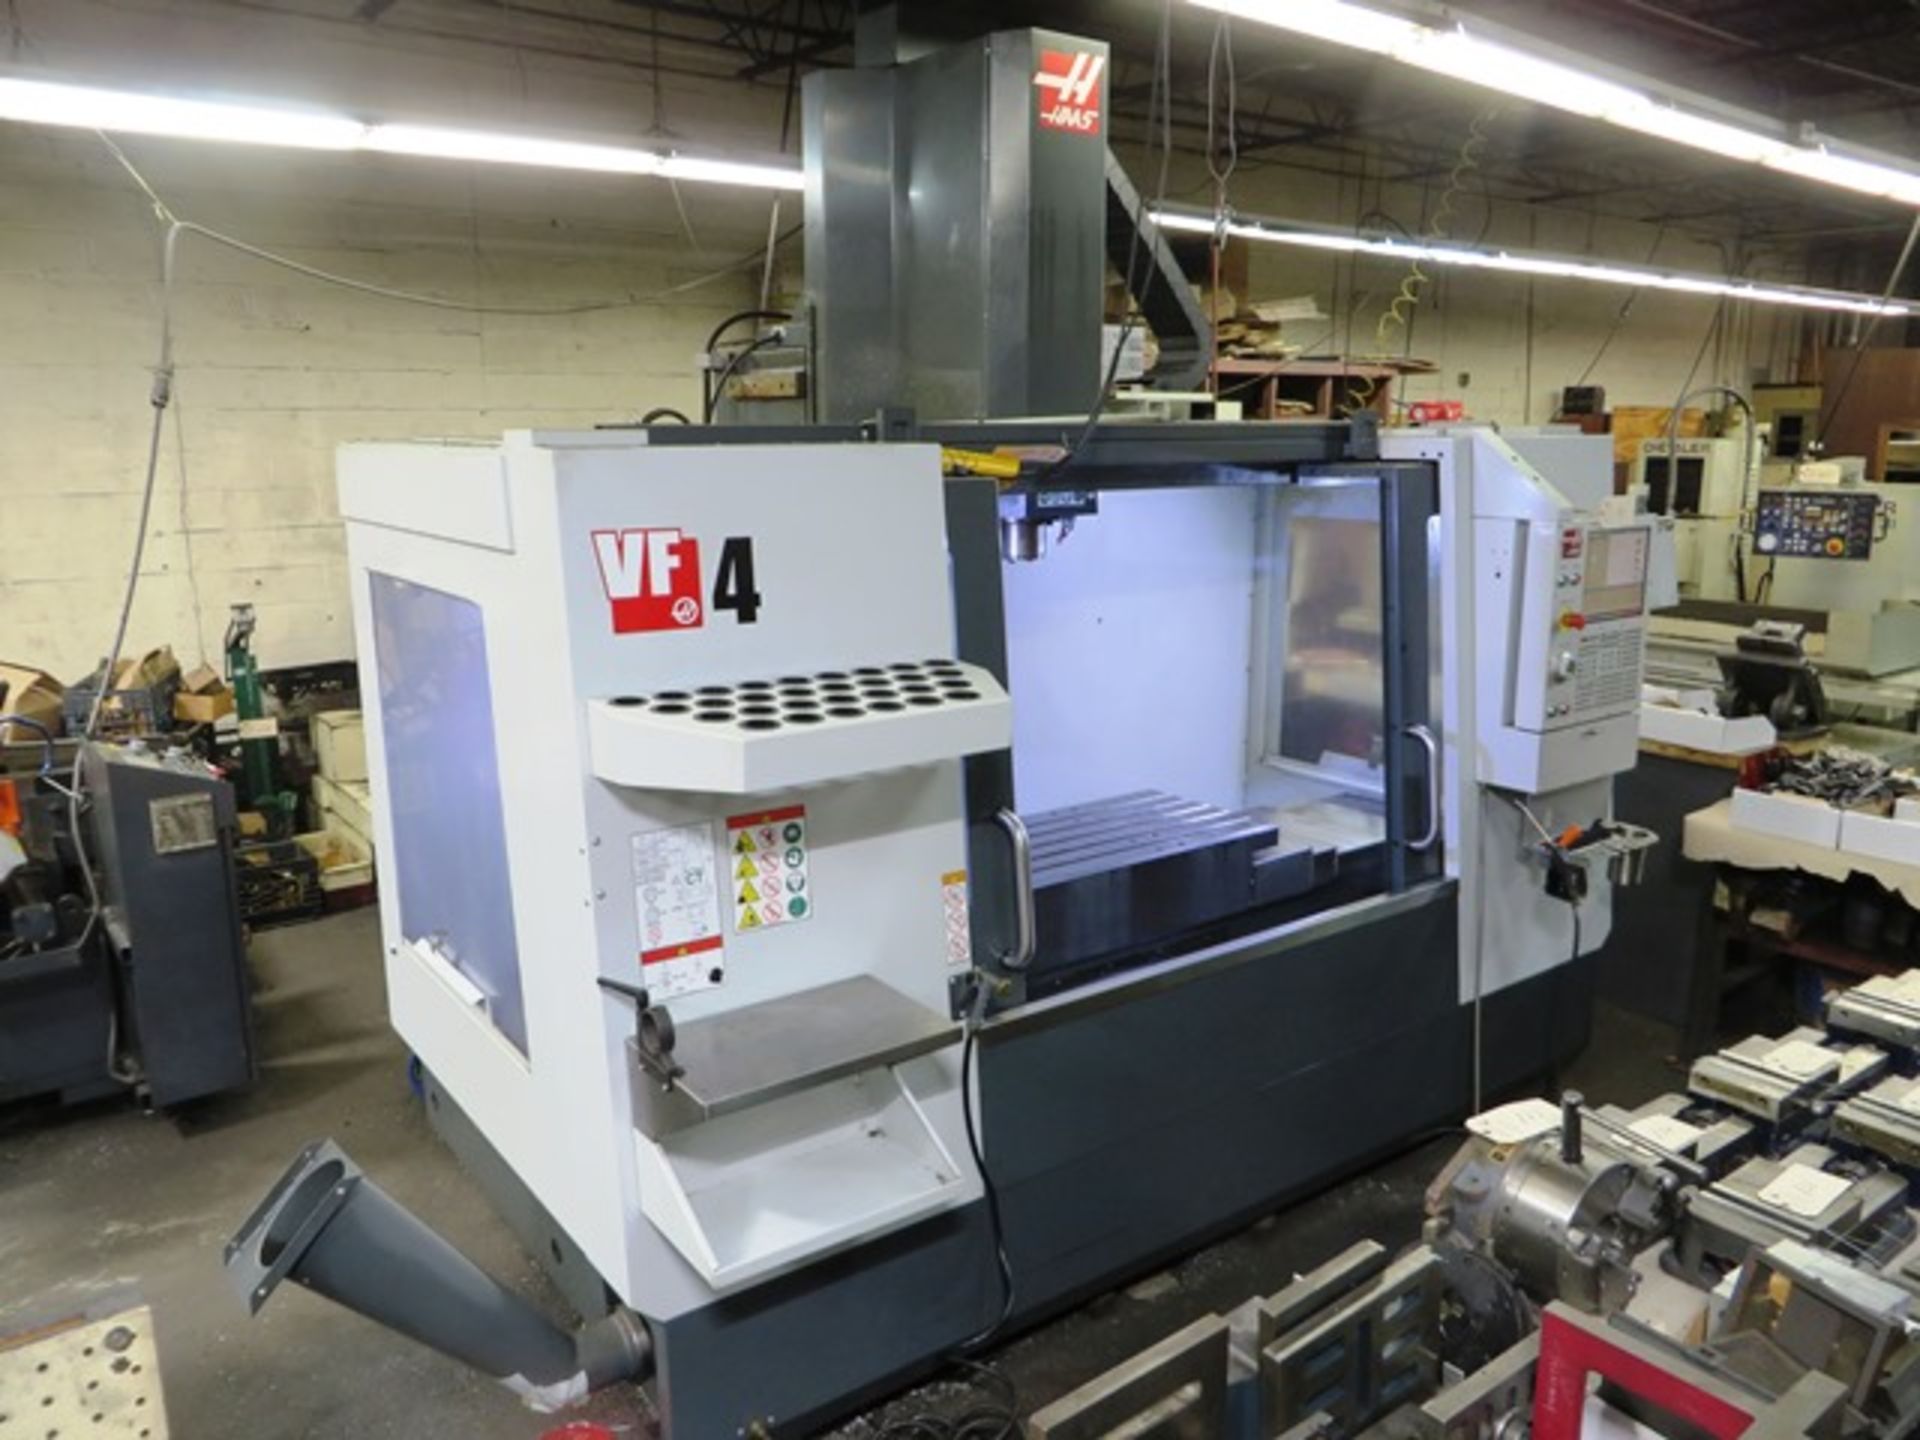 Haas VF-4 3-Axis CNC Vertical Machining Center - Image 3 of 6